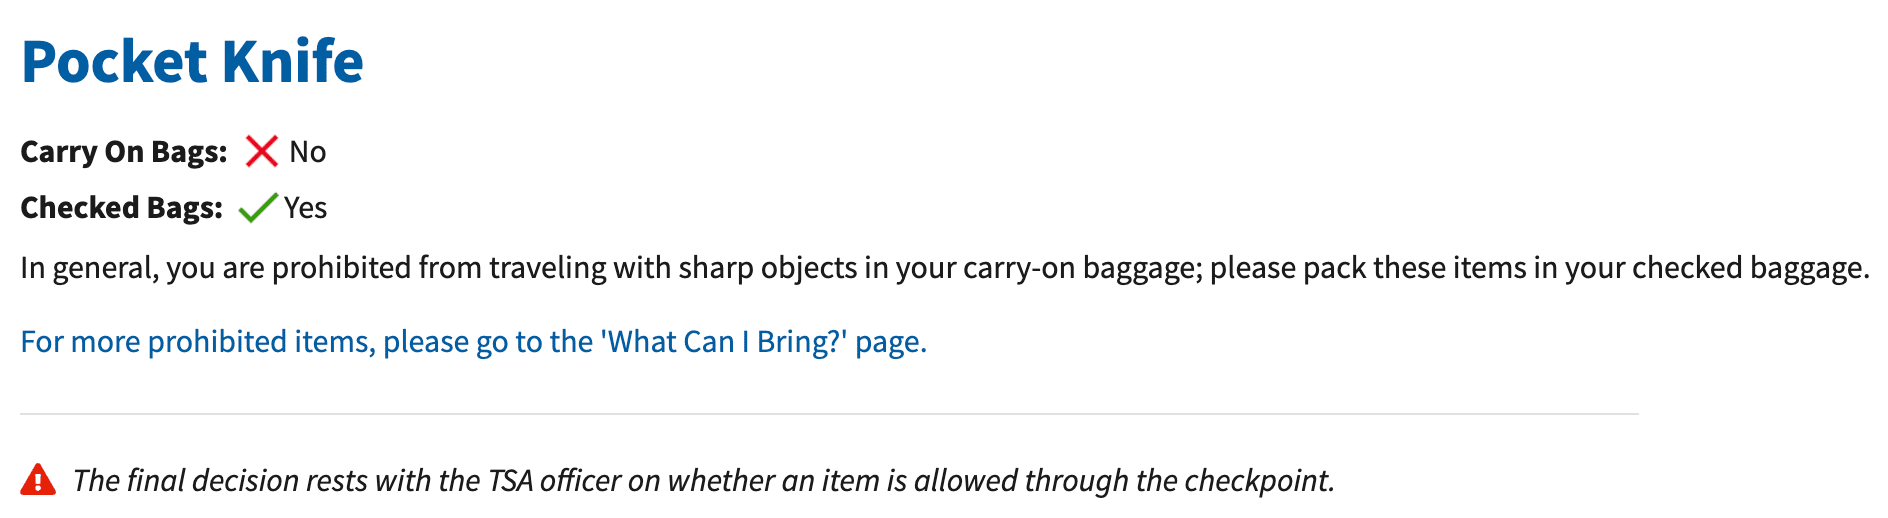 Can you bring a pocket knife on a plane? No

TSA - Carry On Bags: No, Checked Bags: Yes